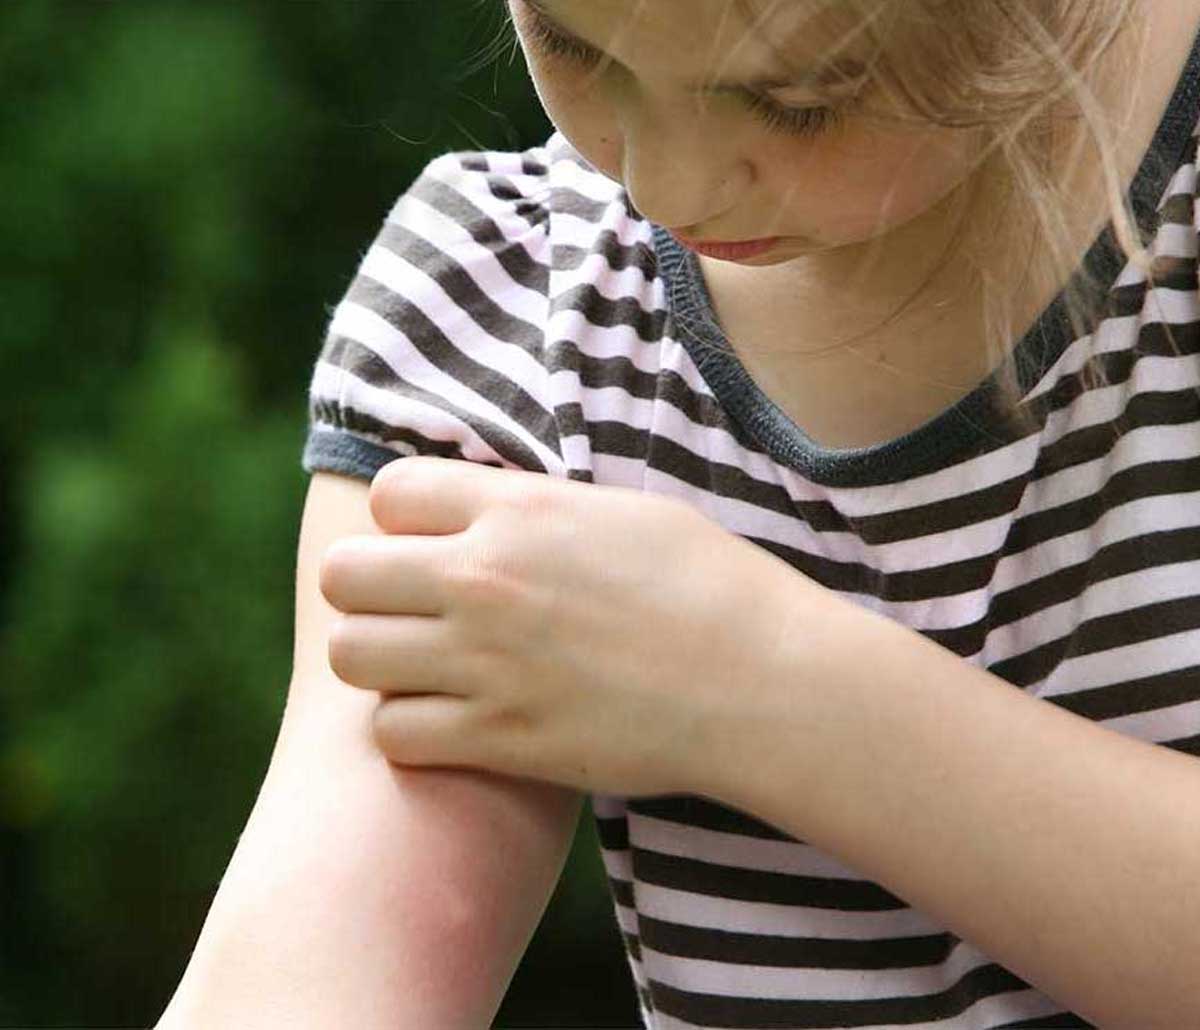 A young girl scratching a bug bite on her arm